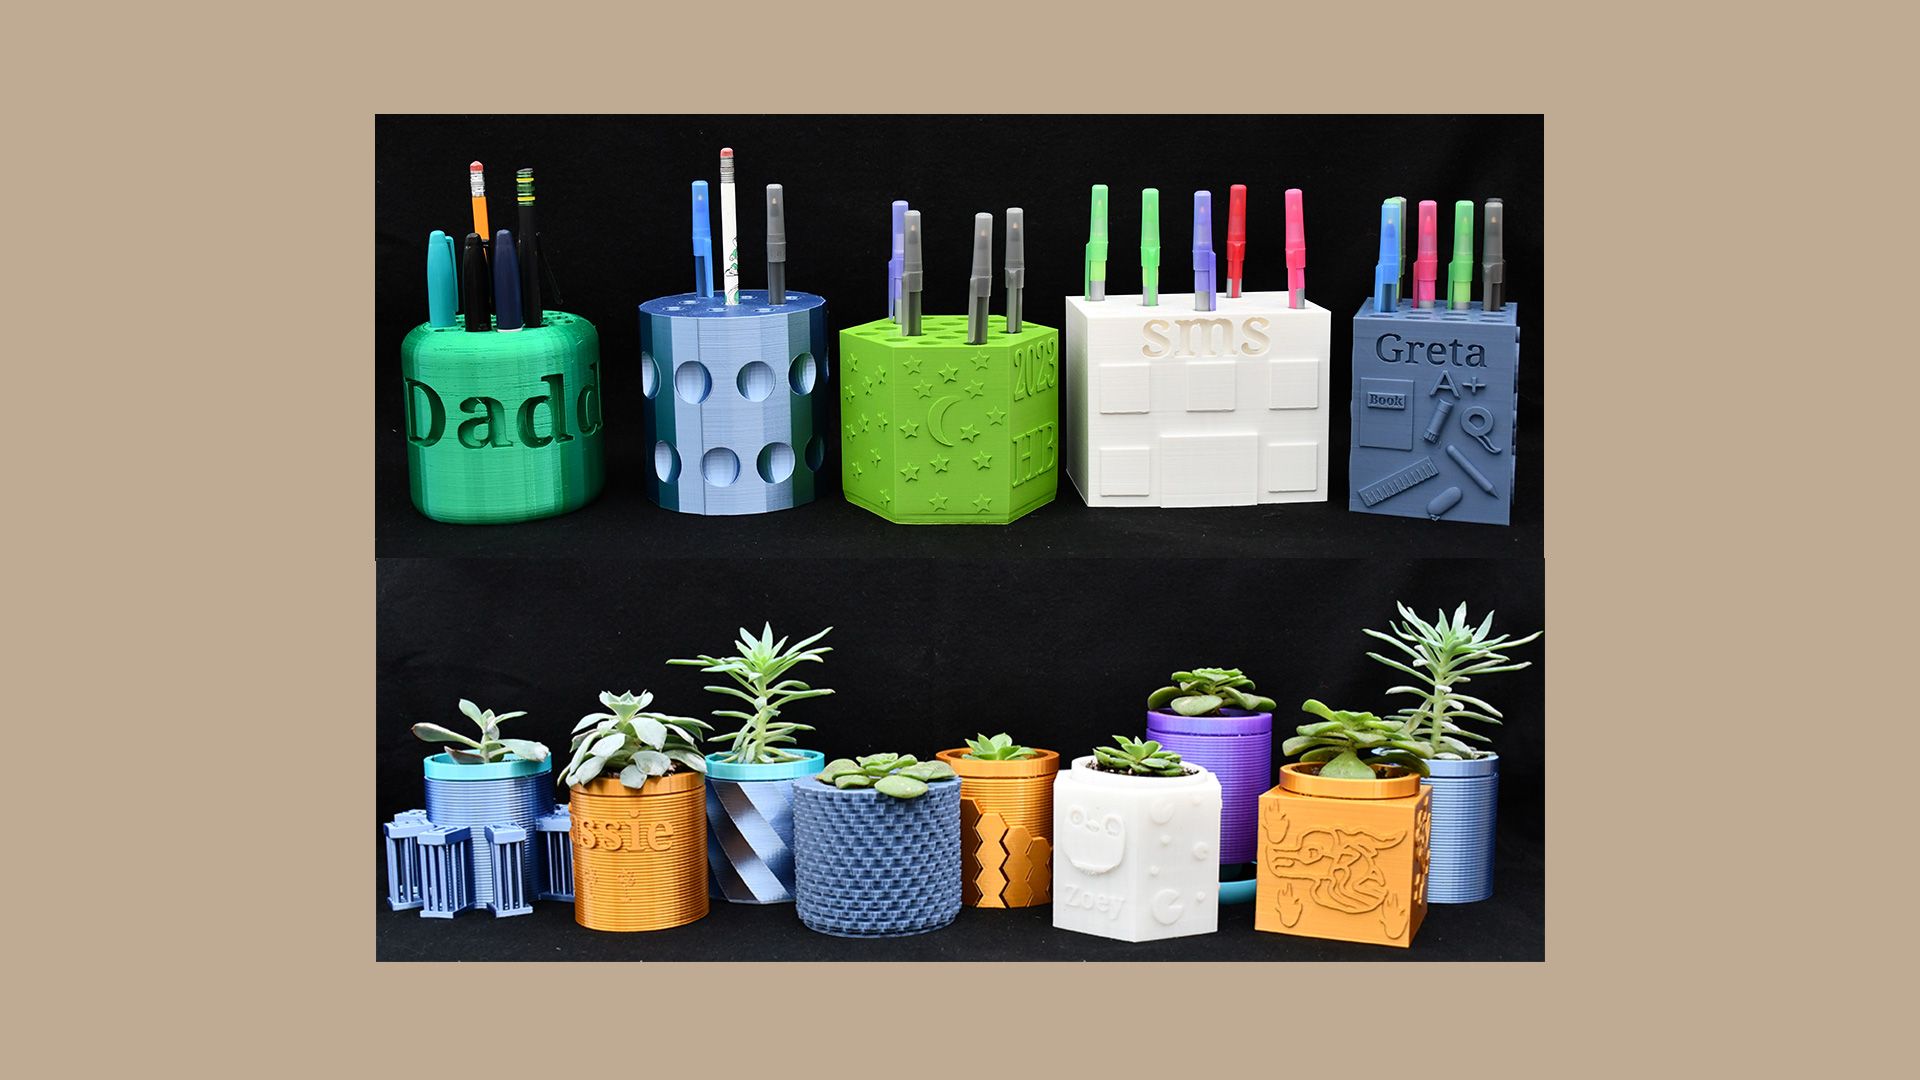 A range of 3D printed pen holders and planters.